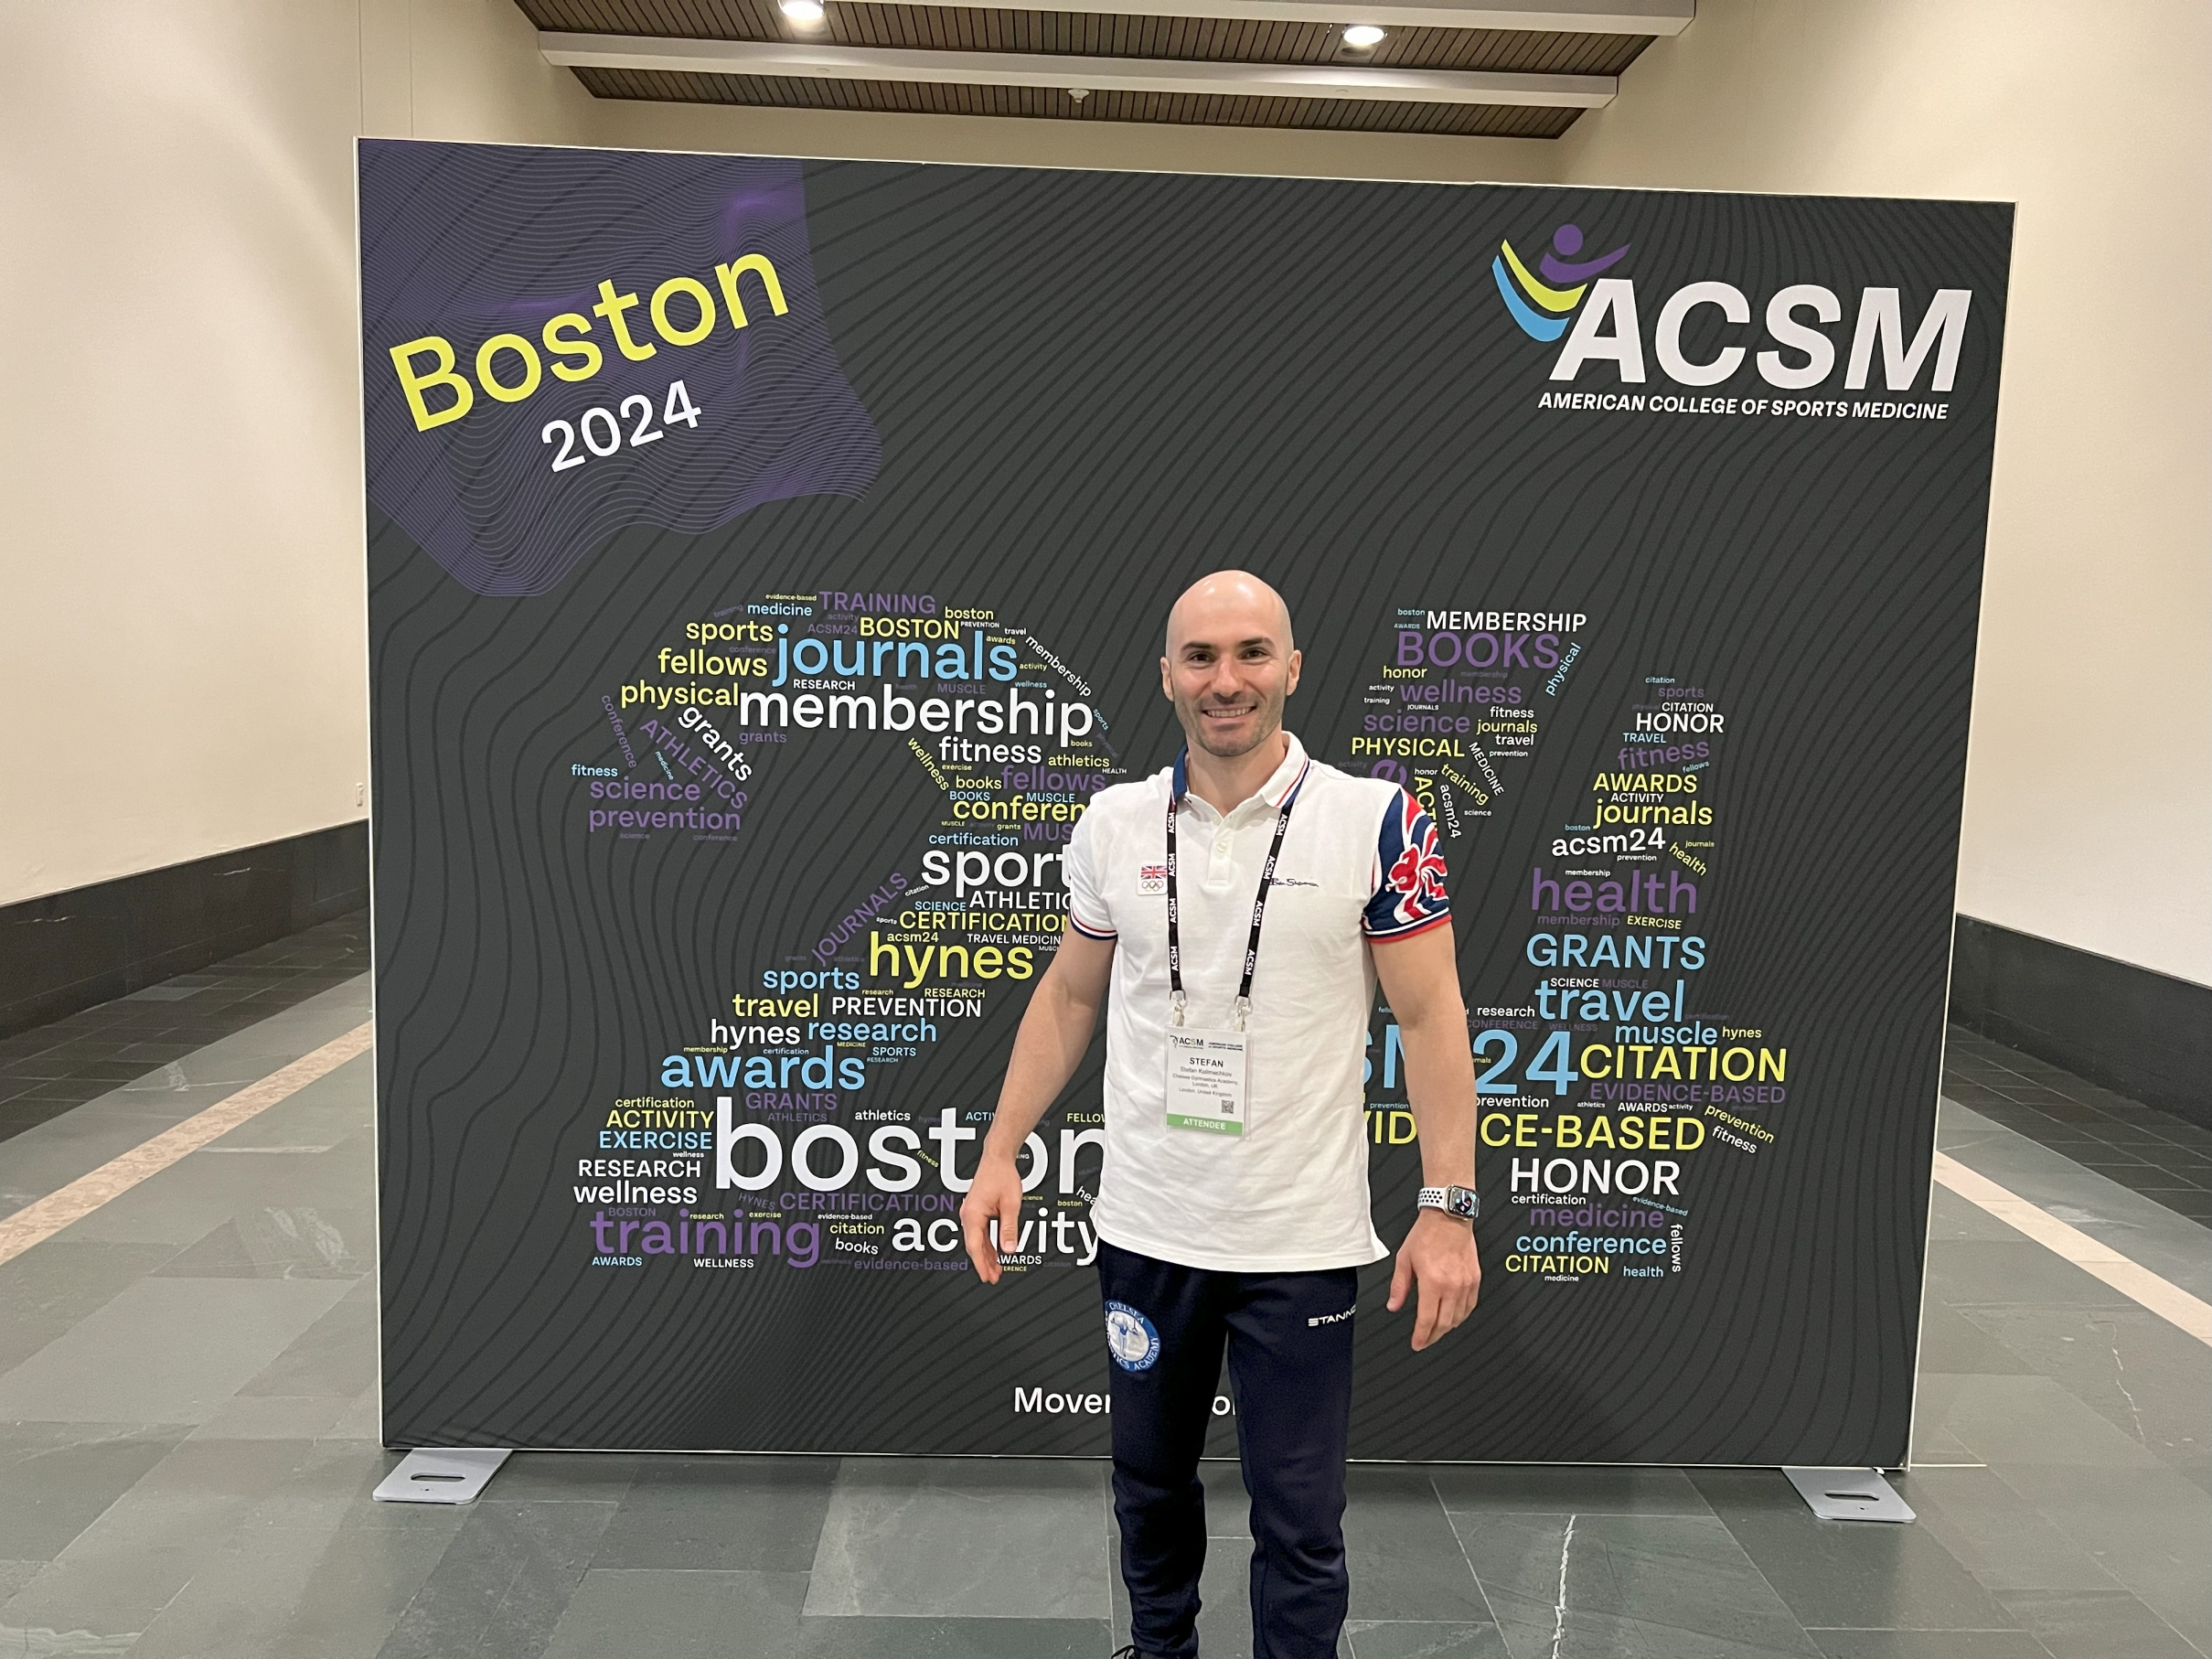 ACSM New Brand - revealed at the Hynes Convention Center in Boston